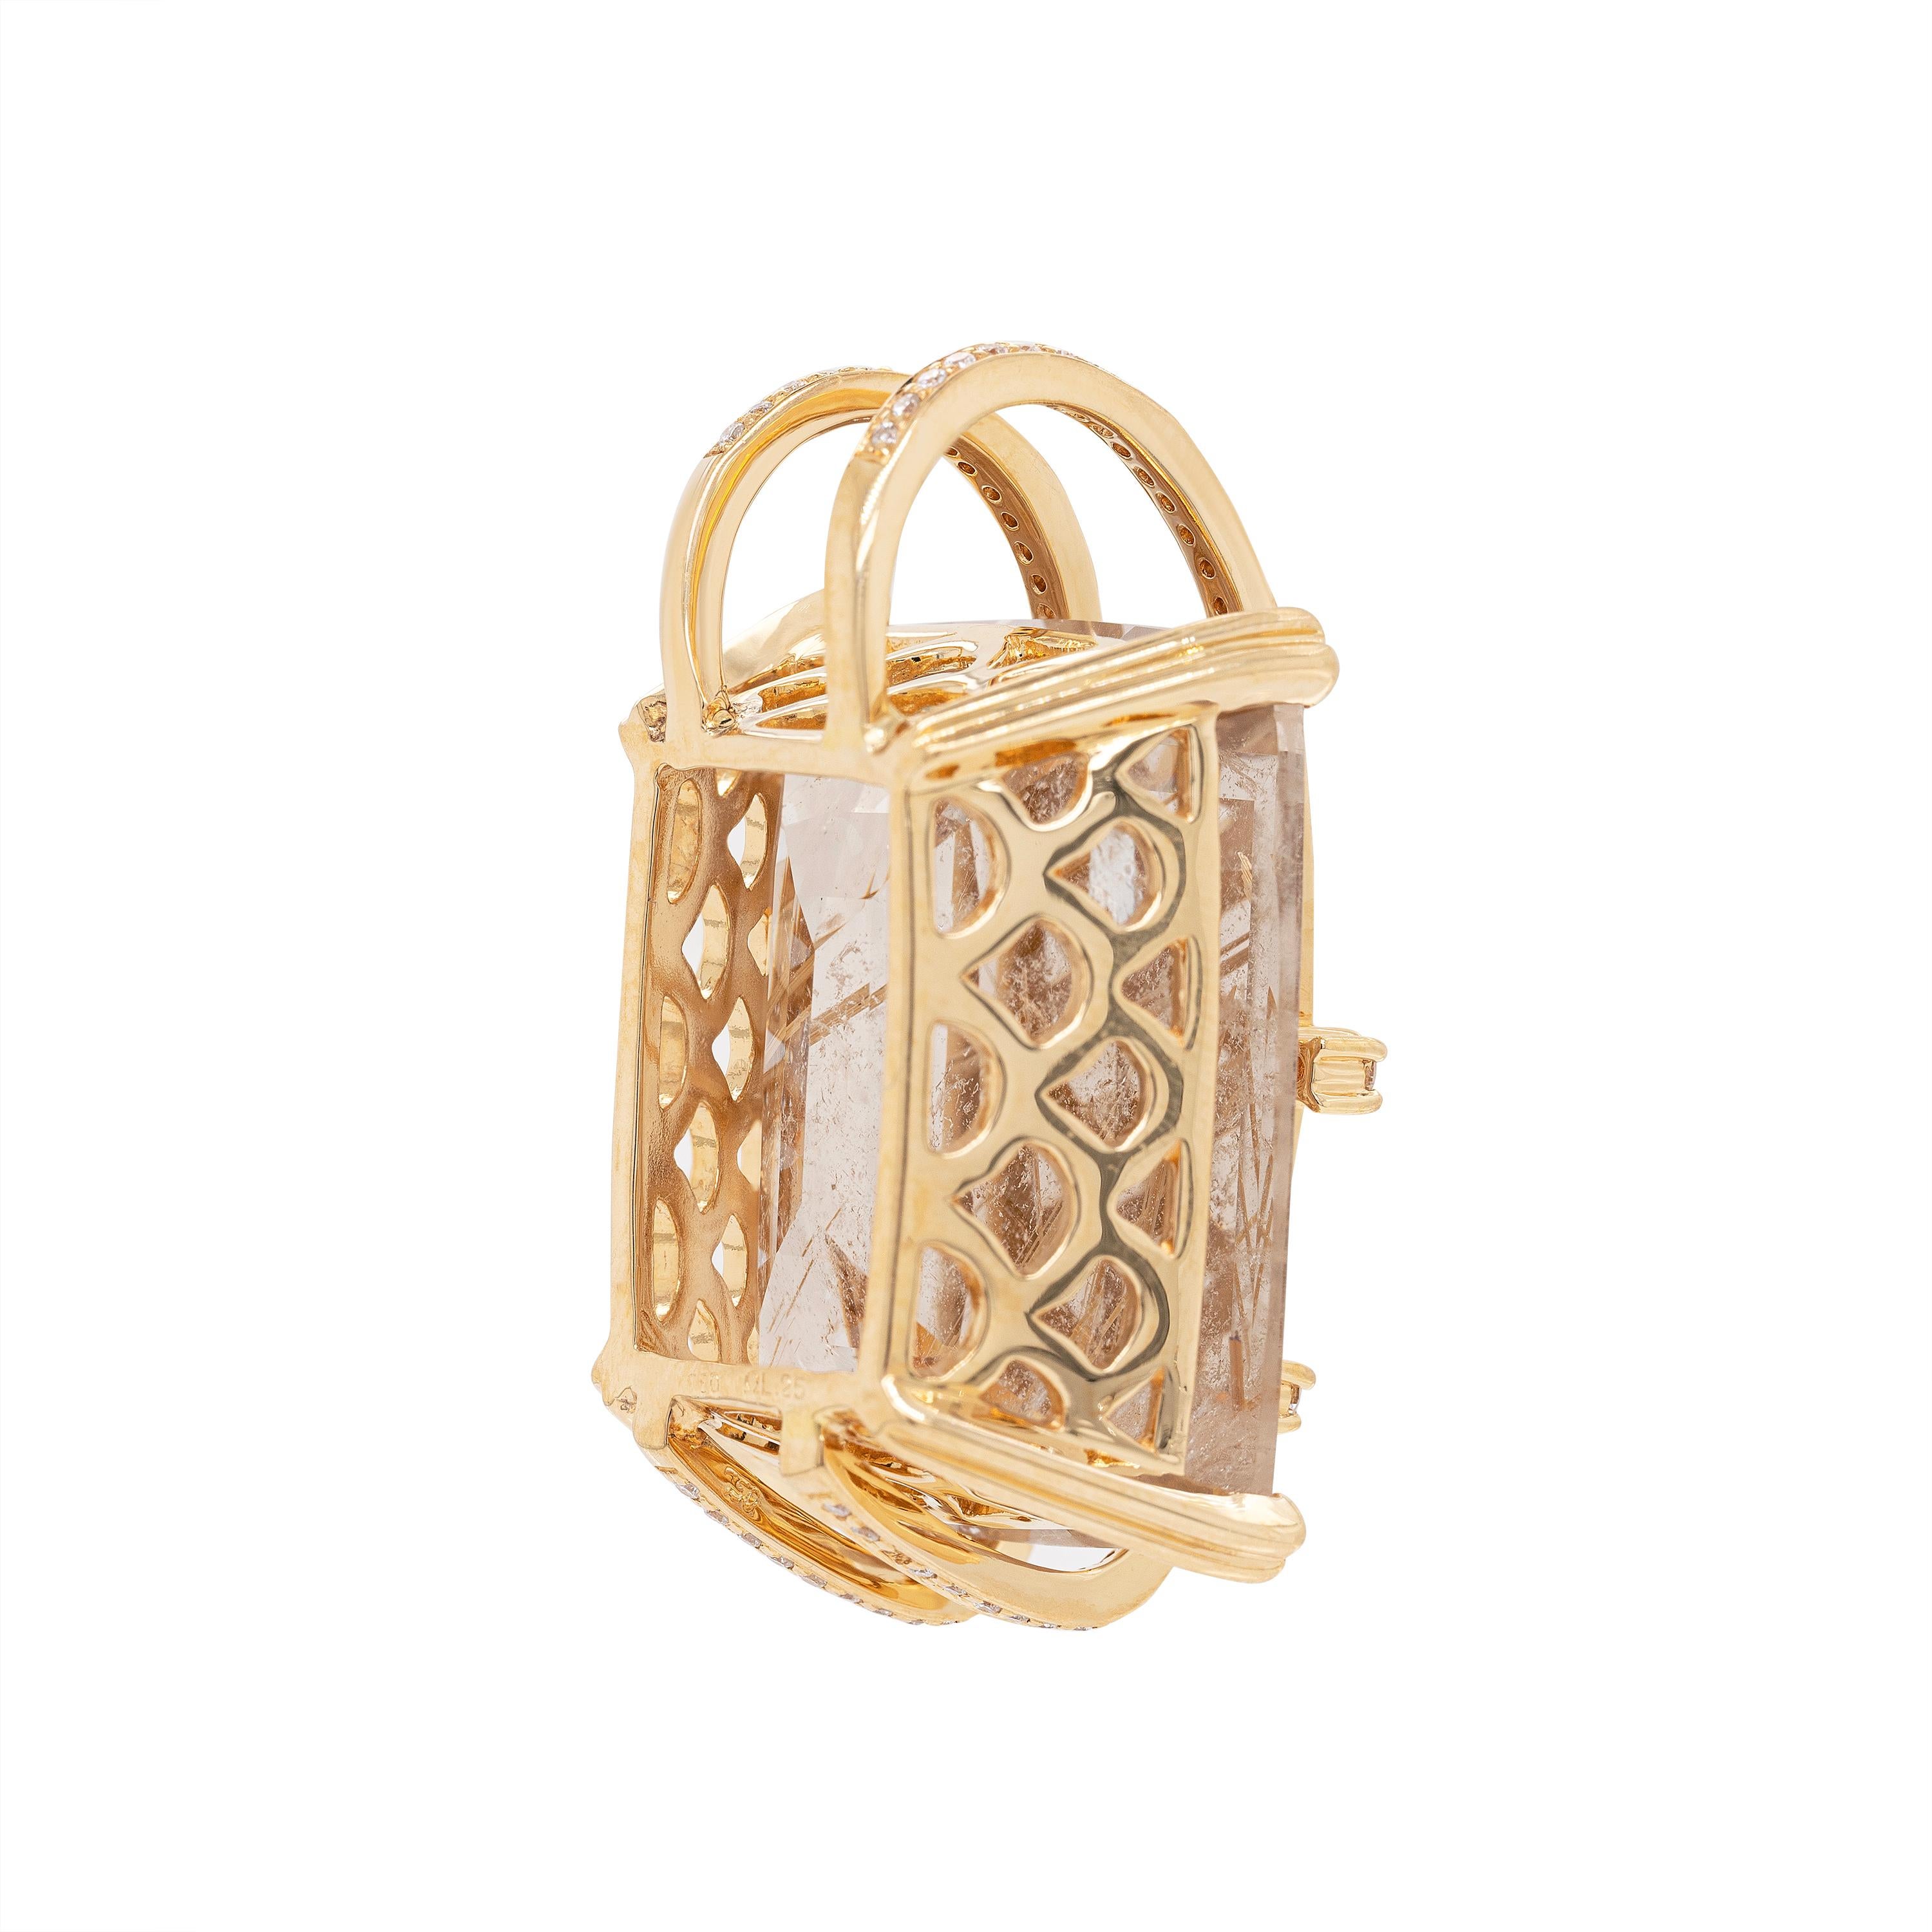 This one of a kind 18 carat yellow gold pendant features a spectacular 25 x 19.5mm cushion shaped rutilated quartz mounted in a four double claw, open work mount. The pendant's bale is shaped from two 18 carat rose gold branches that compliment the